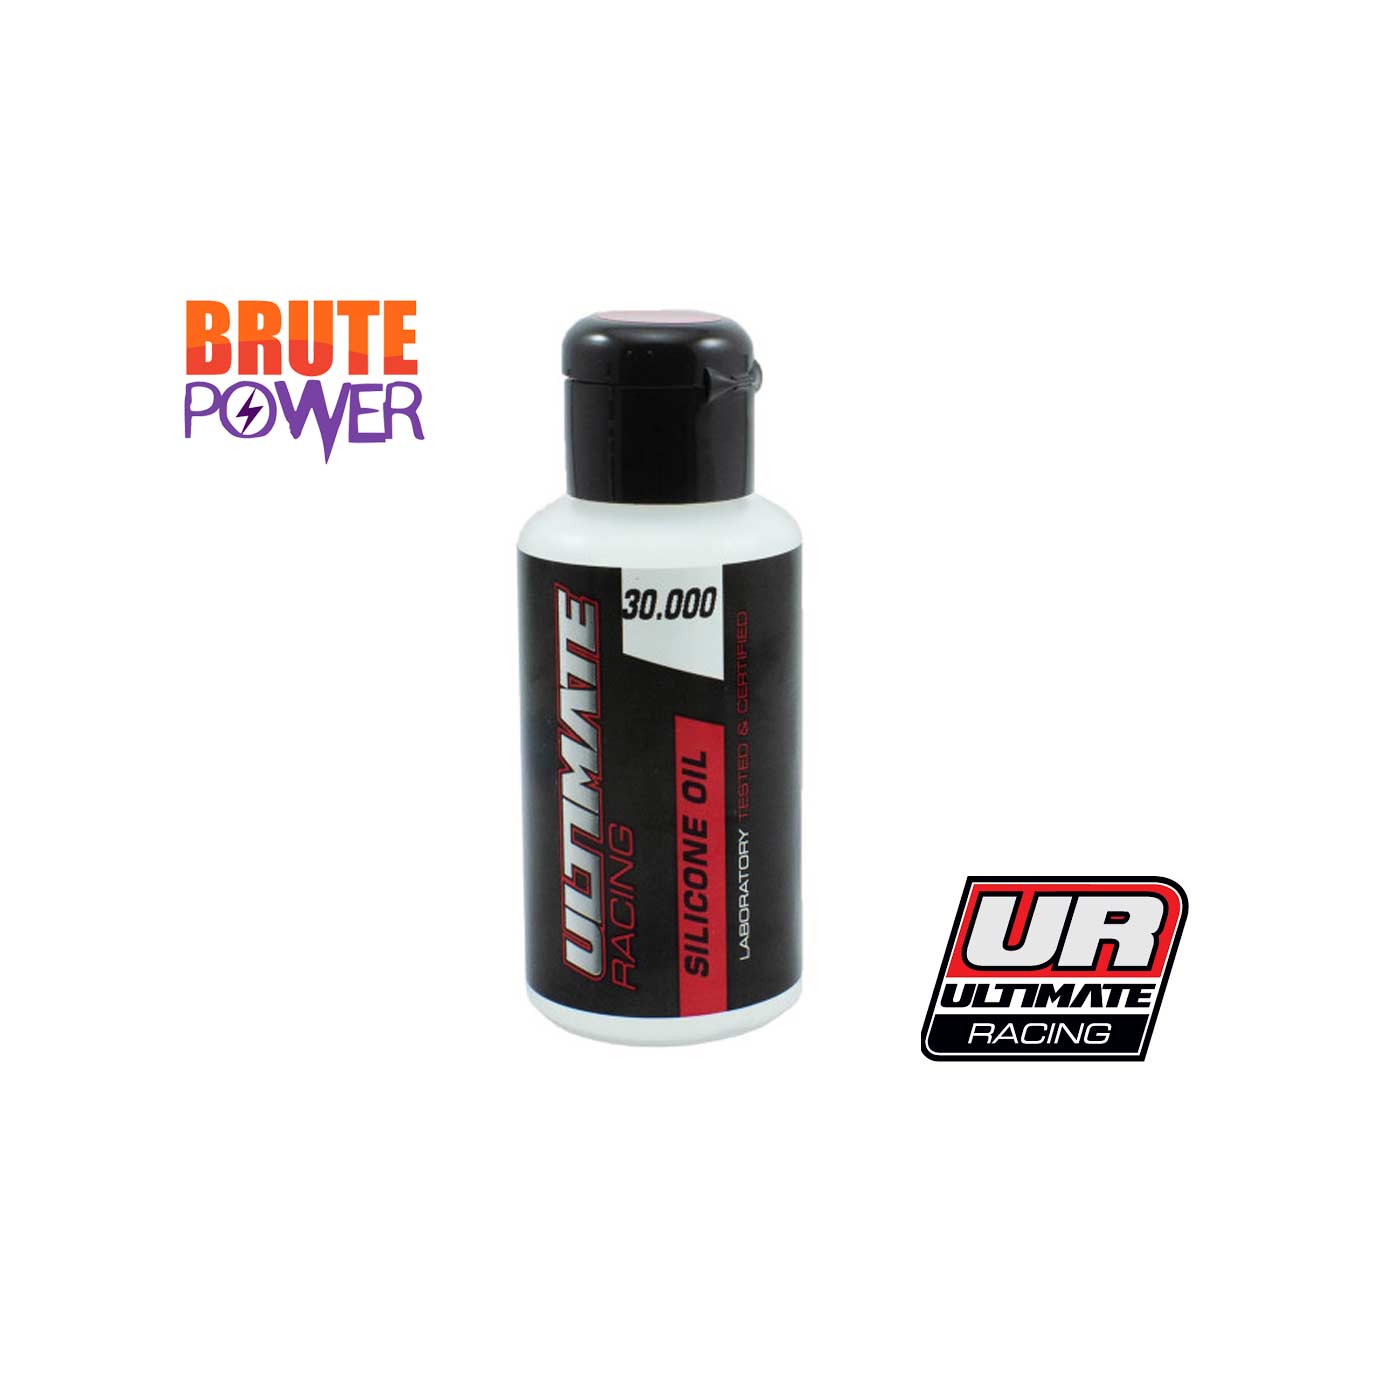 Aceite silicona 30.000 CPS Ultimate 75ml - Brutepower